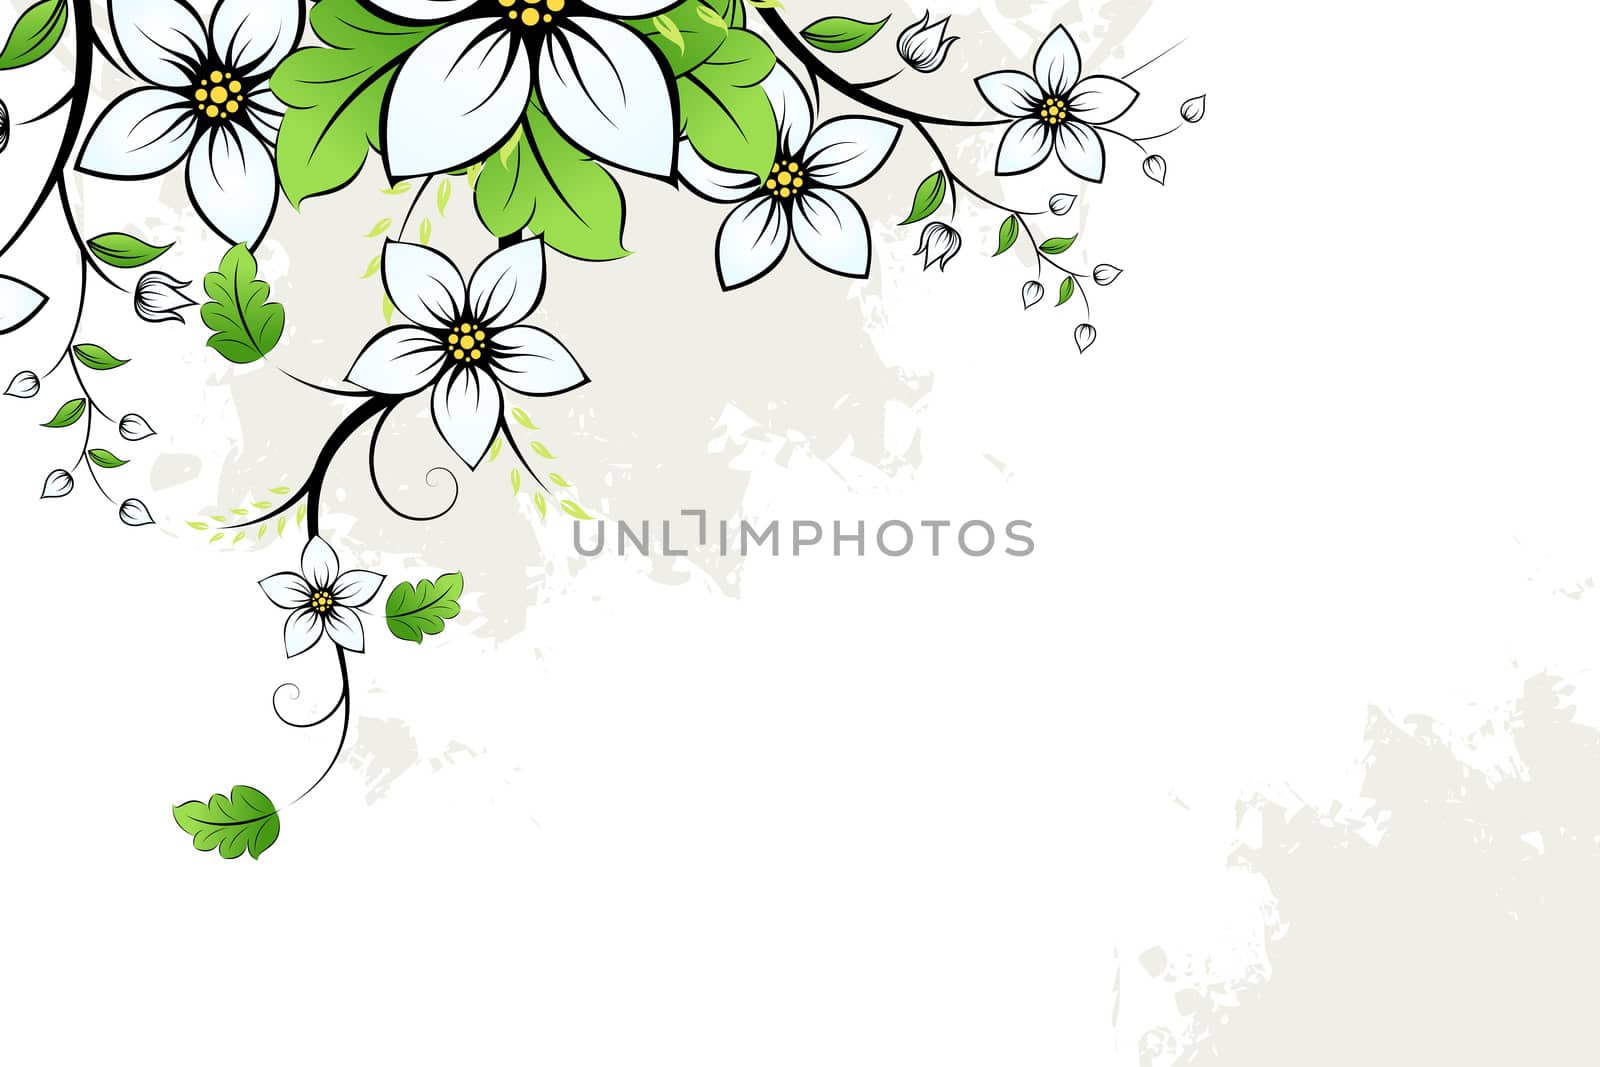 Flowers on grunge background for your design